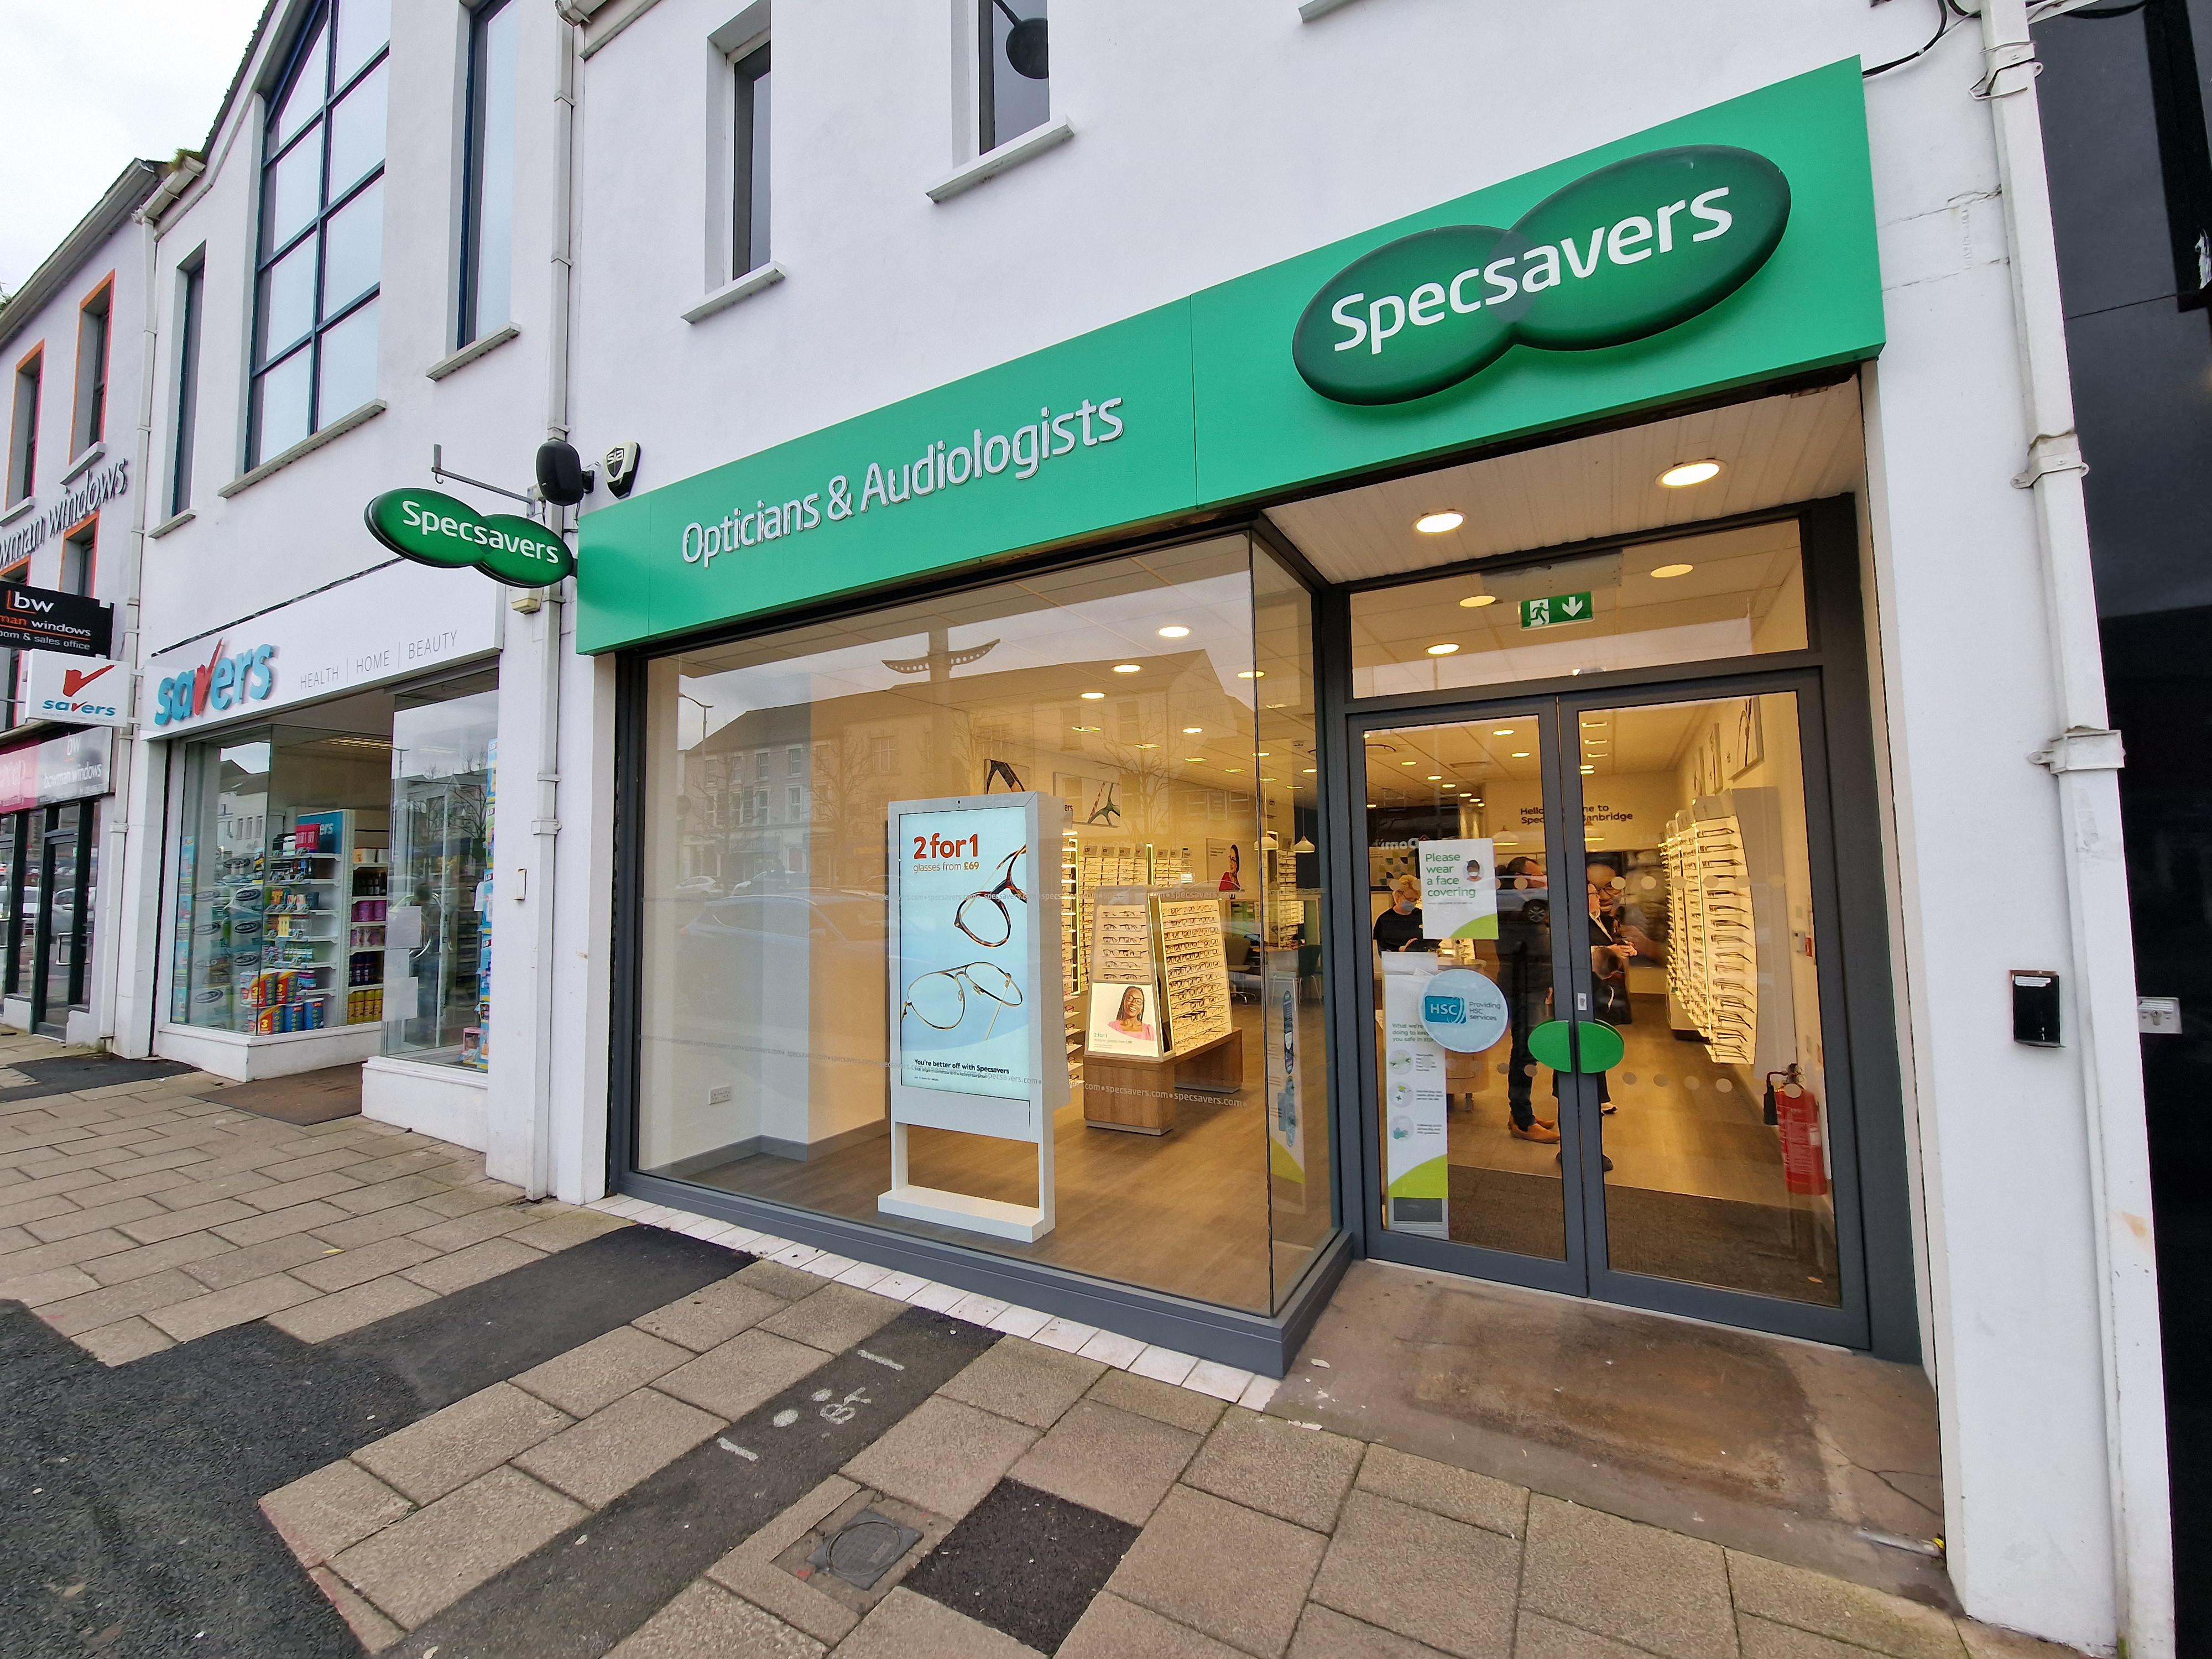 Images Specsavers Opticians and Audiologists - Banbridge